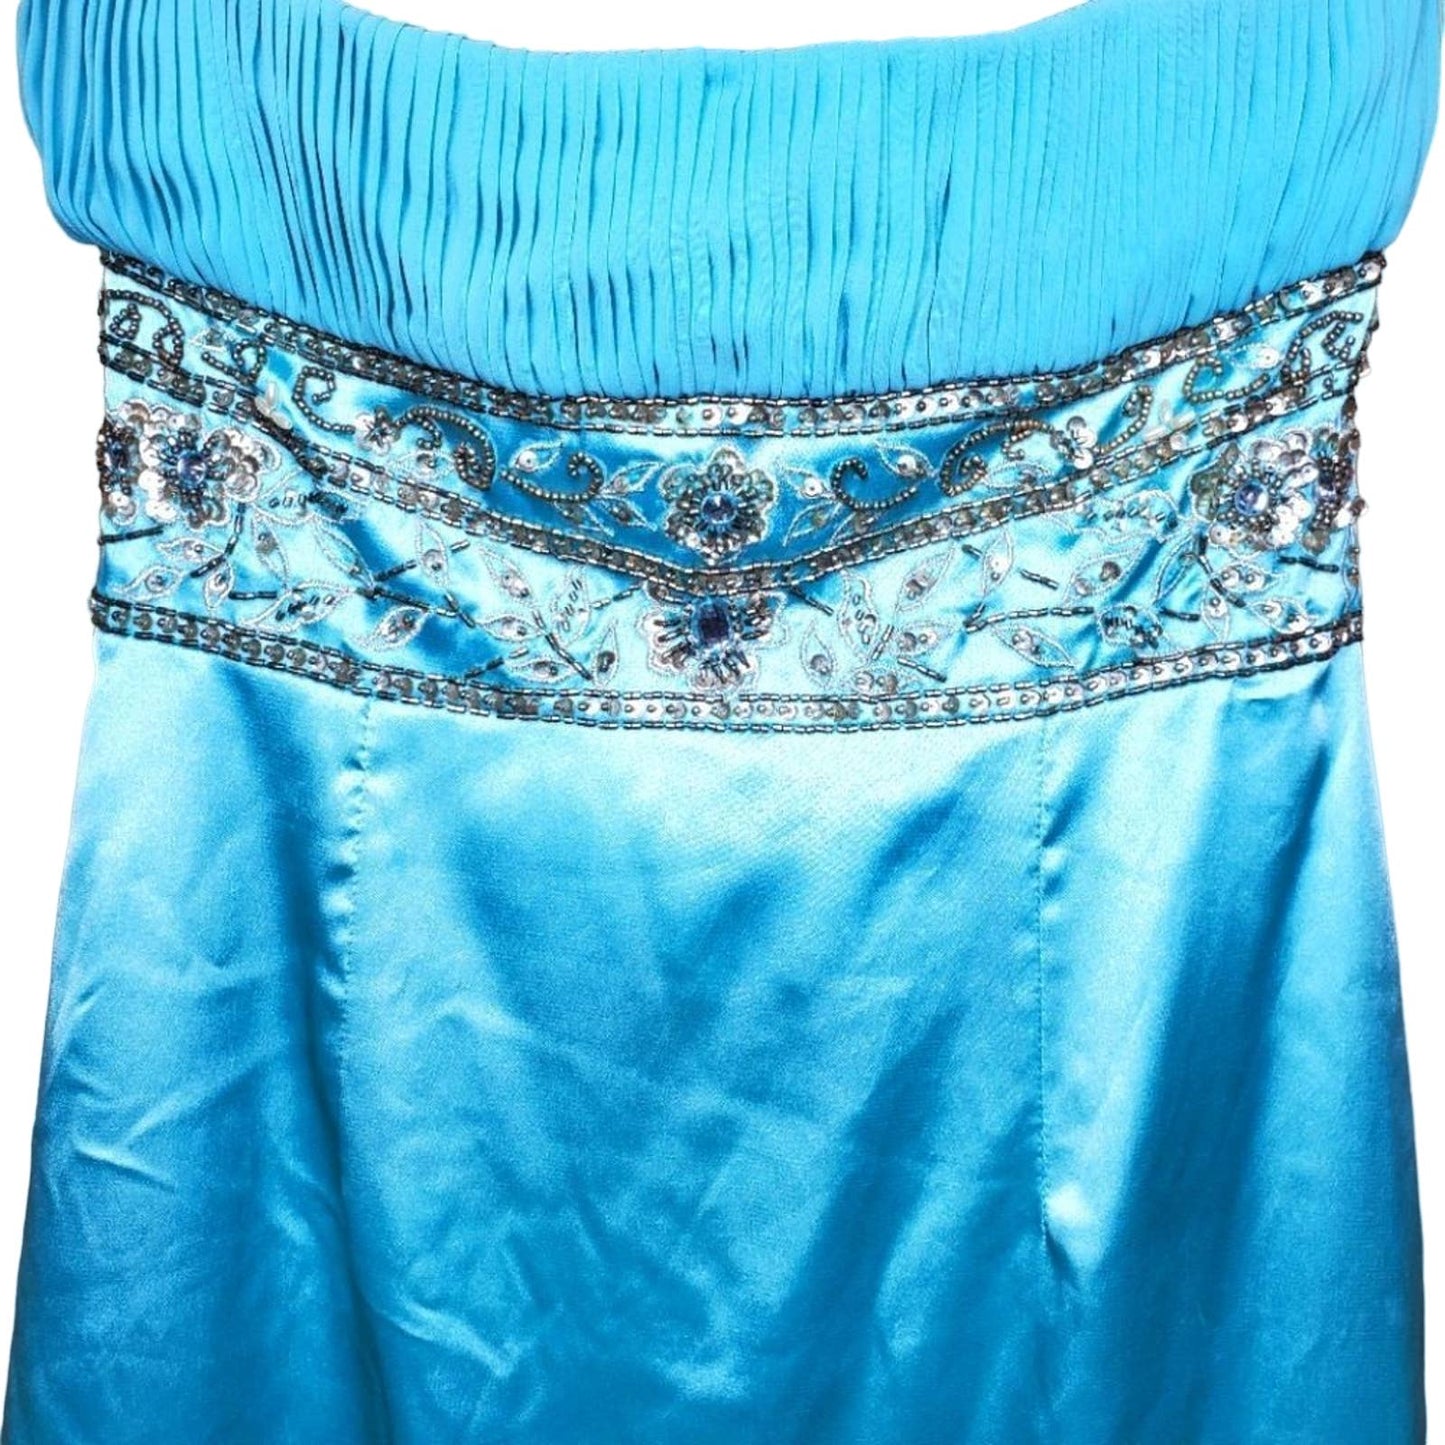 NEW Sue Wong Strapless Beaded Embroidered Blue Dress, Size 2